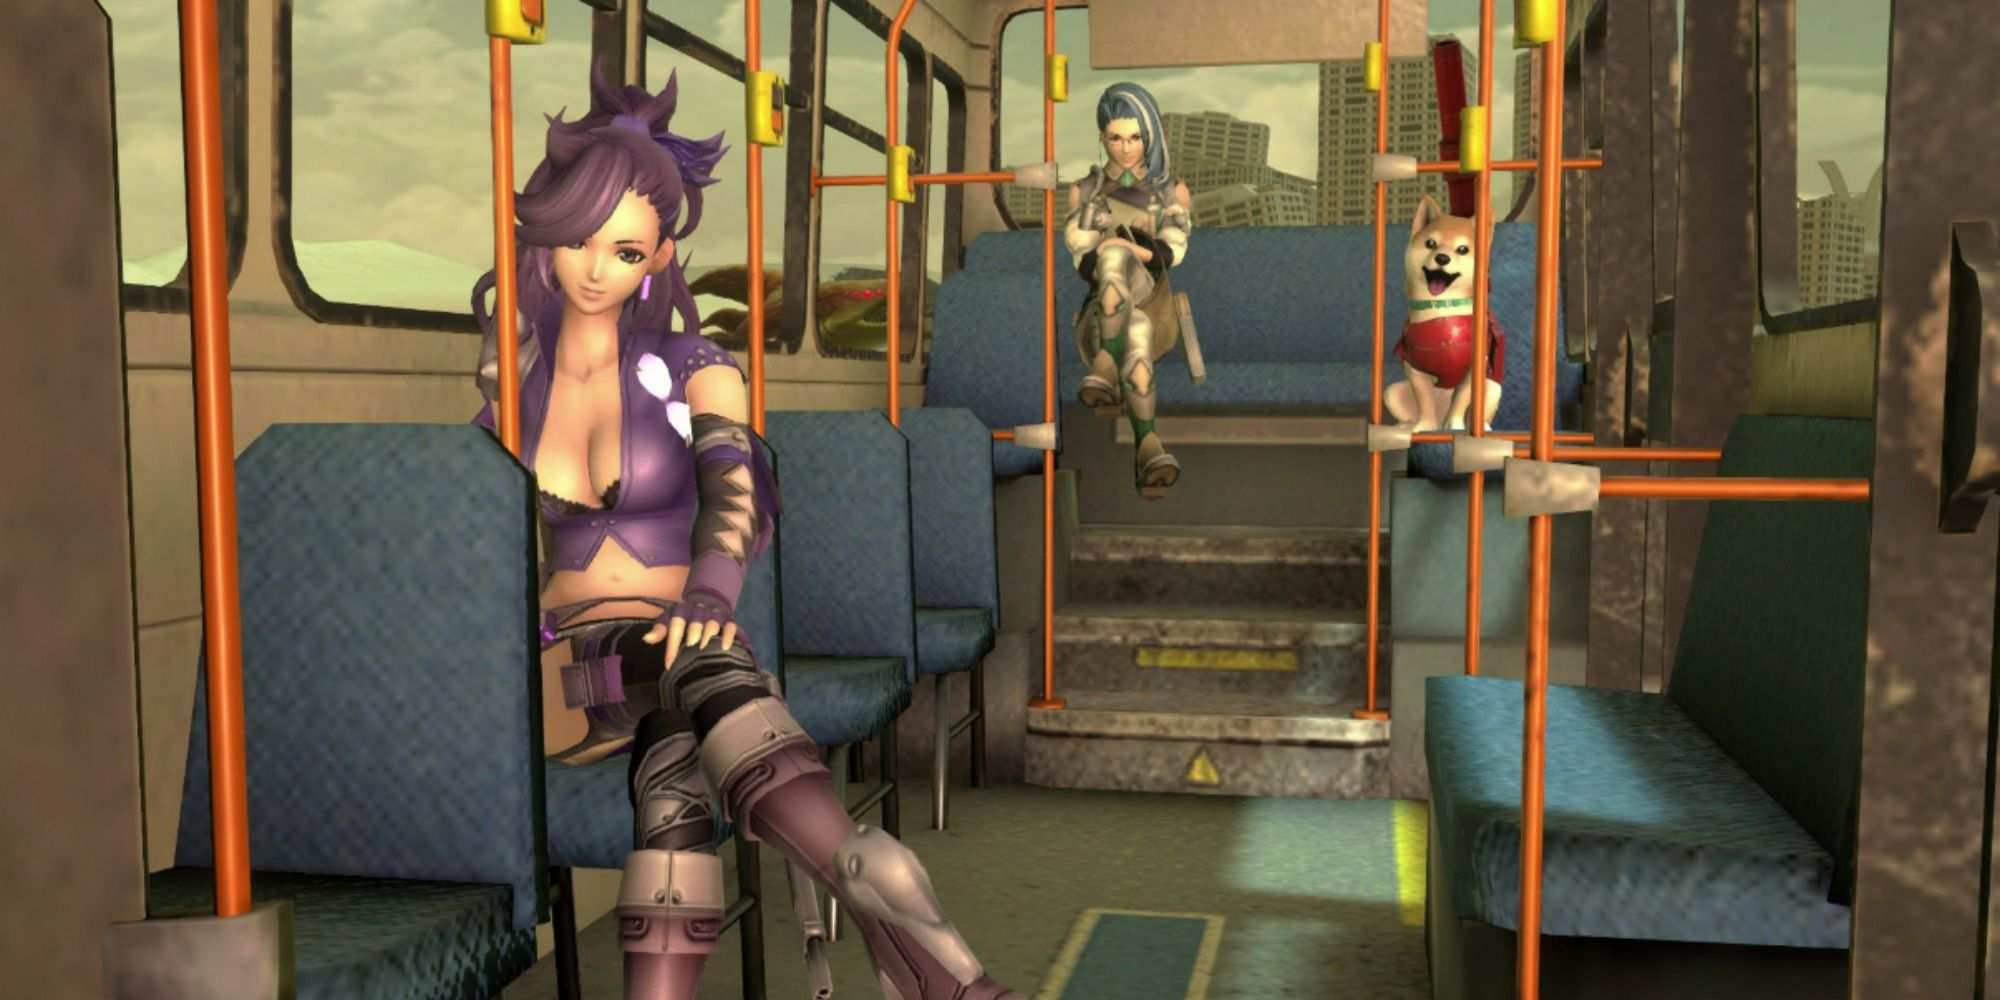 metal max xeno reborn characters and dog aboard a bus